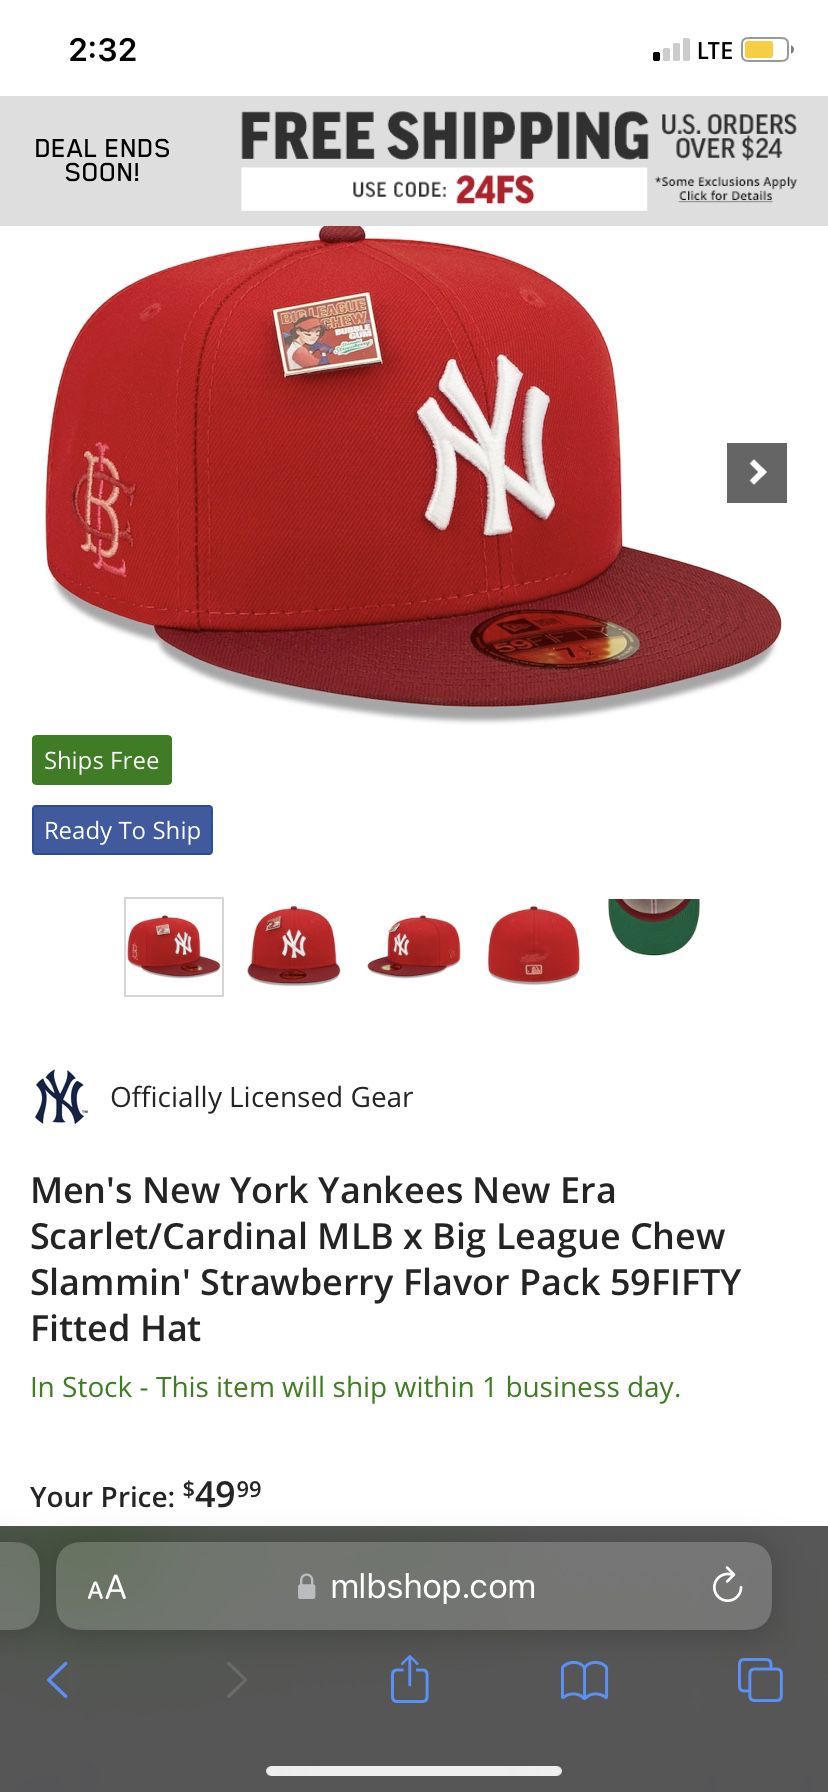 Red New York Yankees New Era MLB x Big League Chew 59FIFTY Fitted